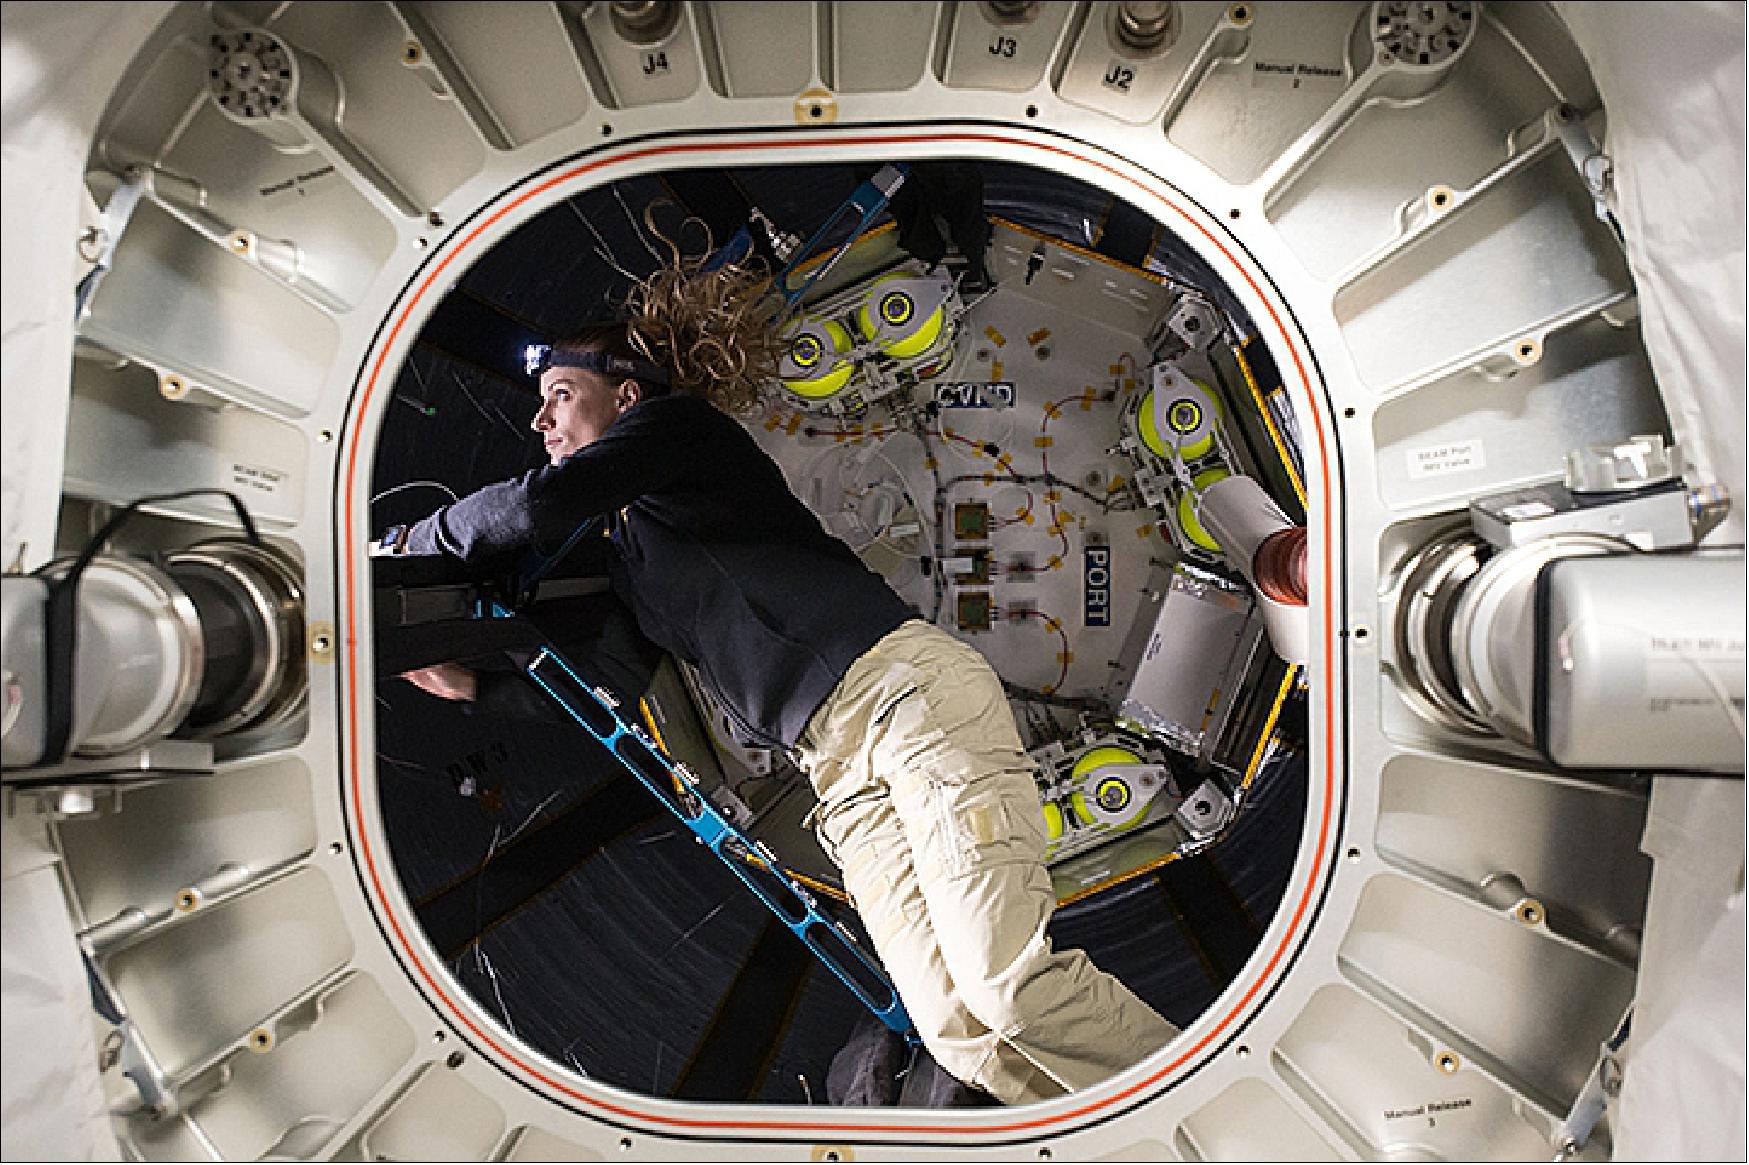 Figure 10: NASA astronaut Kate Rubins conducts tests and replaces parts inside the BEAM on Sept. 5, 2016 (image credit: NASA)